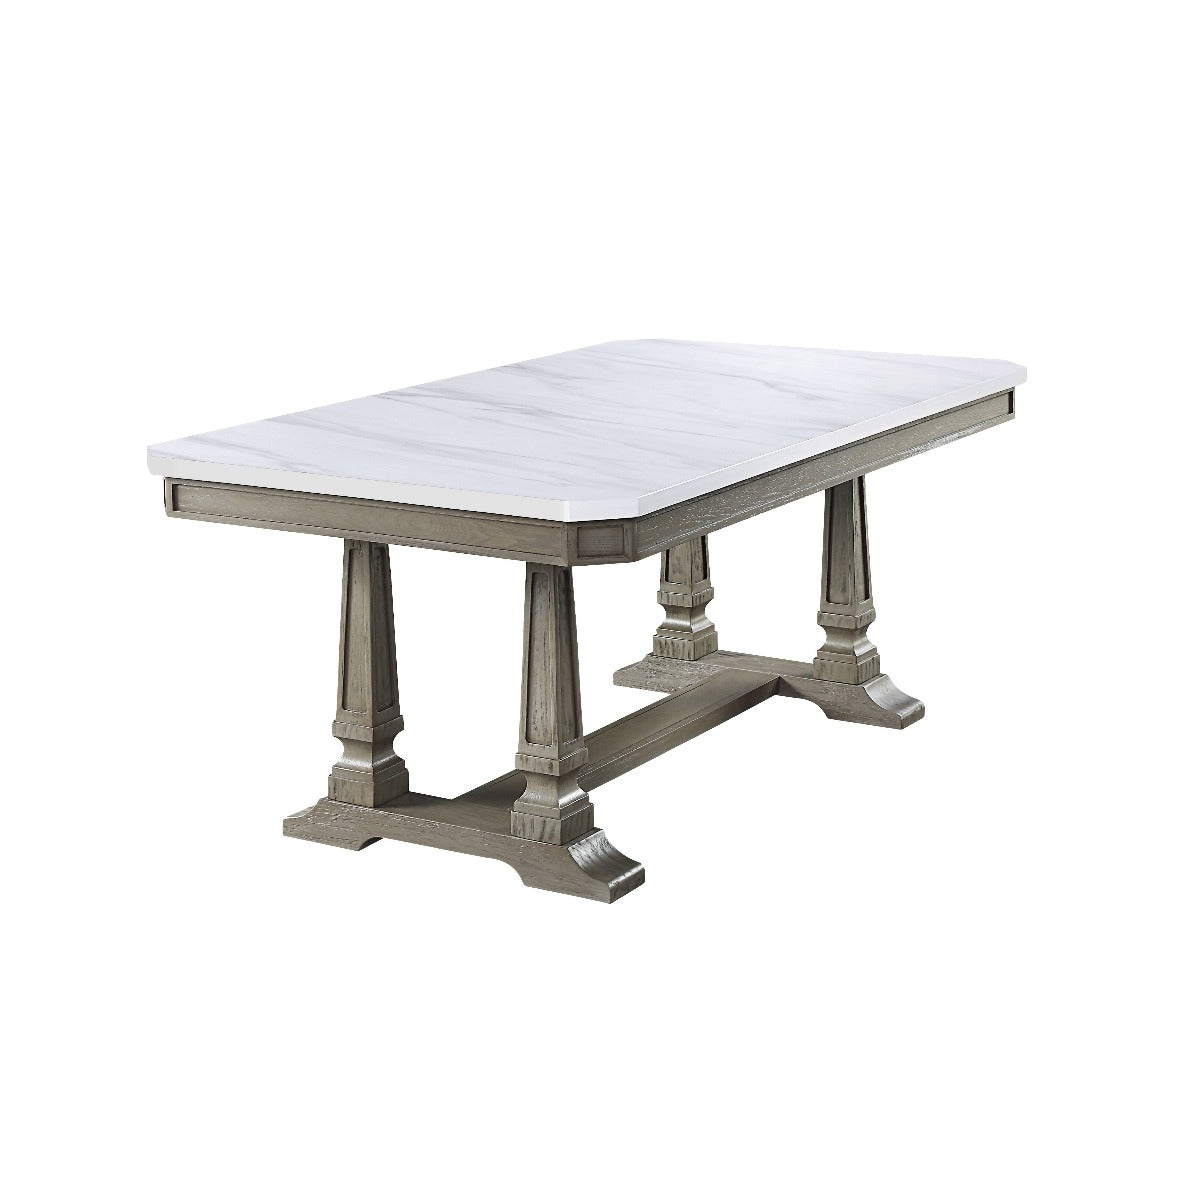 ACME Furniture Dining Tables - ACME Zumala Dining Table, Marble & Weathered Oak Finish